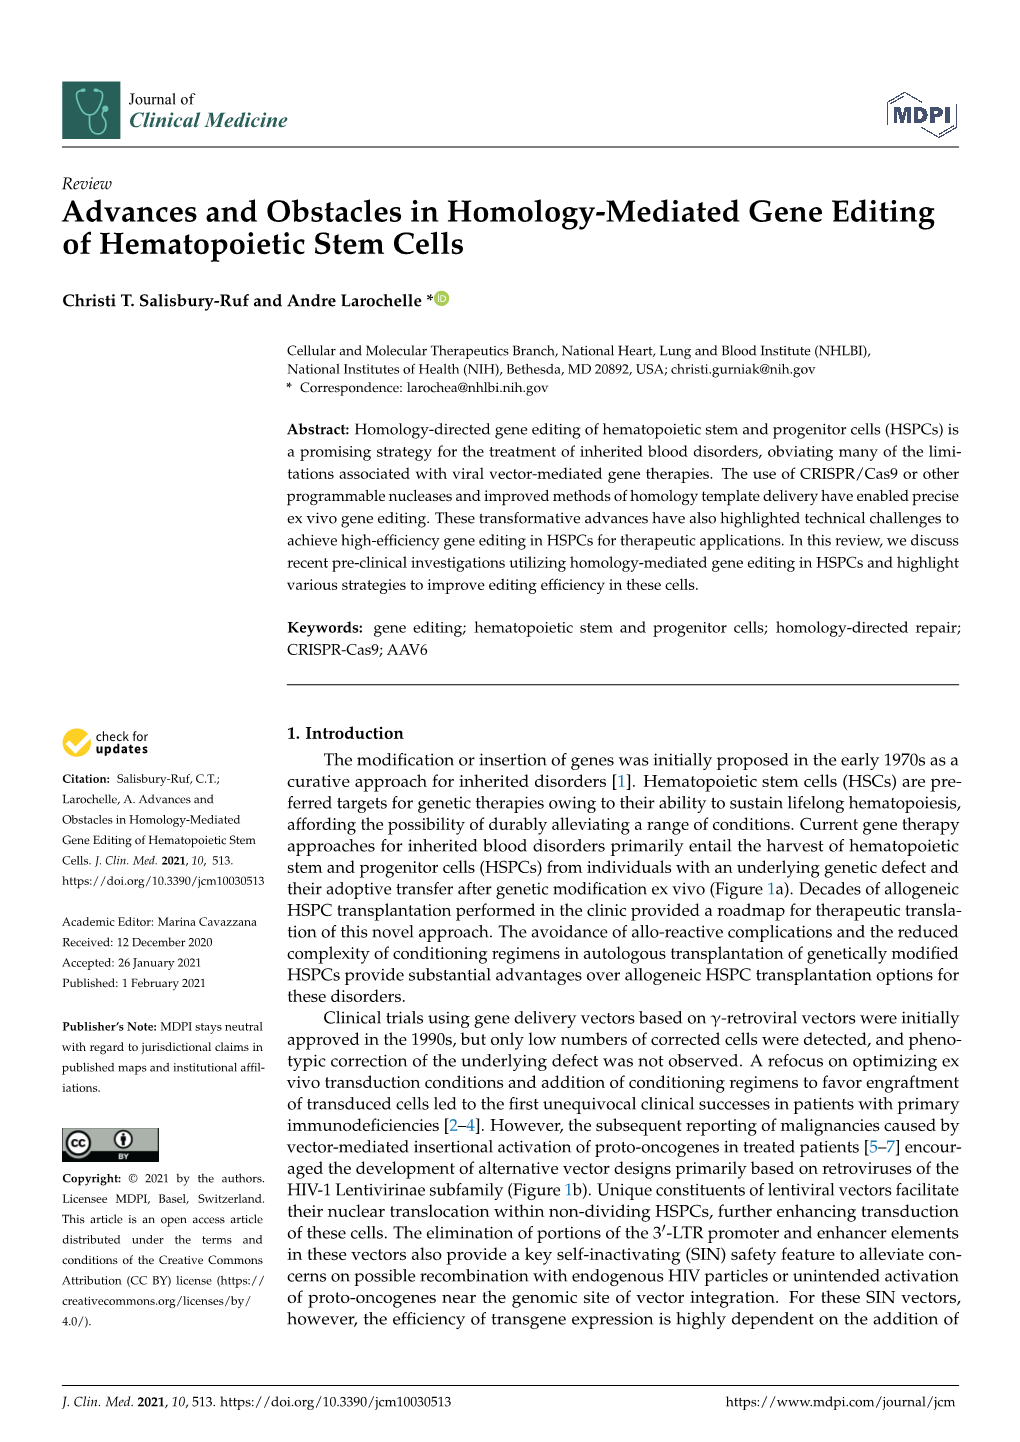 Advances and Obstacles in Homology-Mediated Gene Editing of Hematopoietic Stem Cells